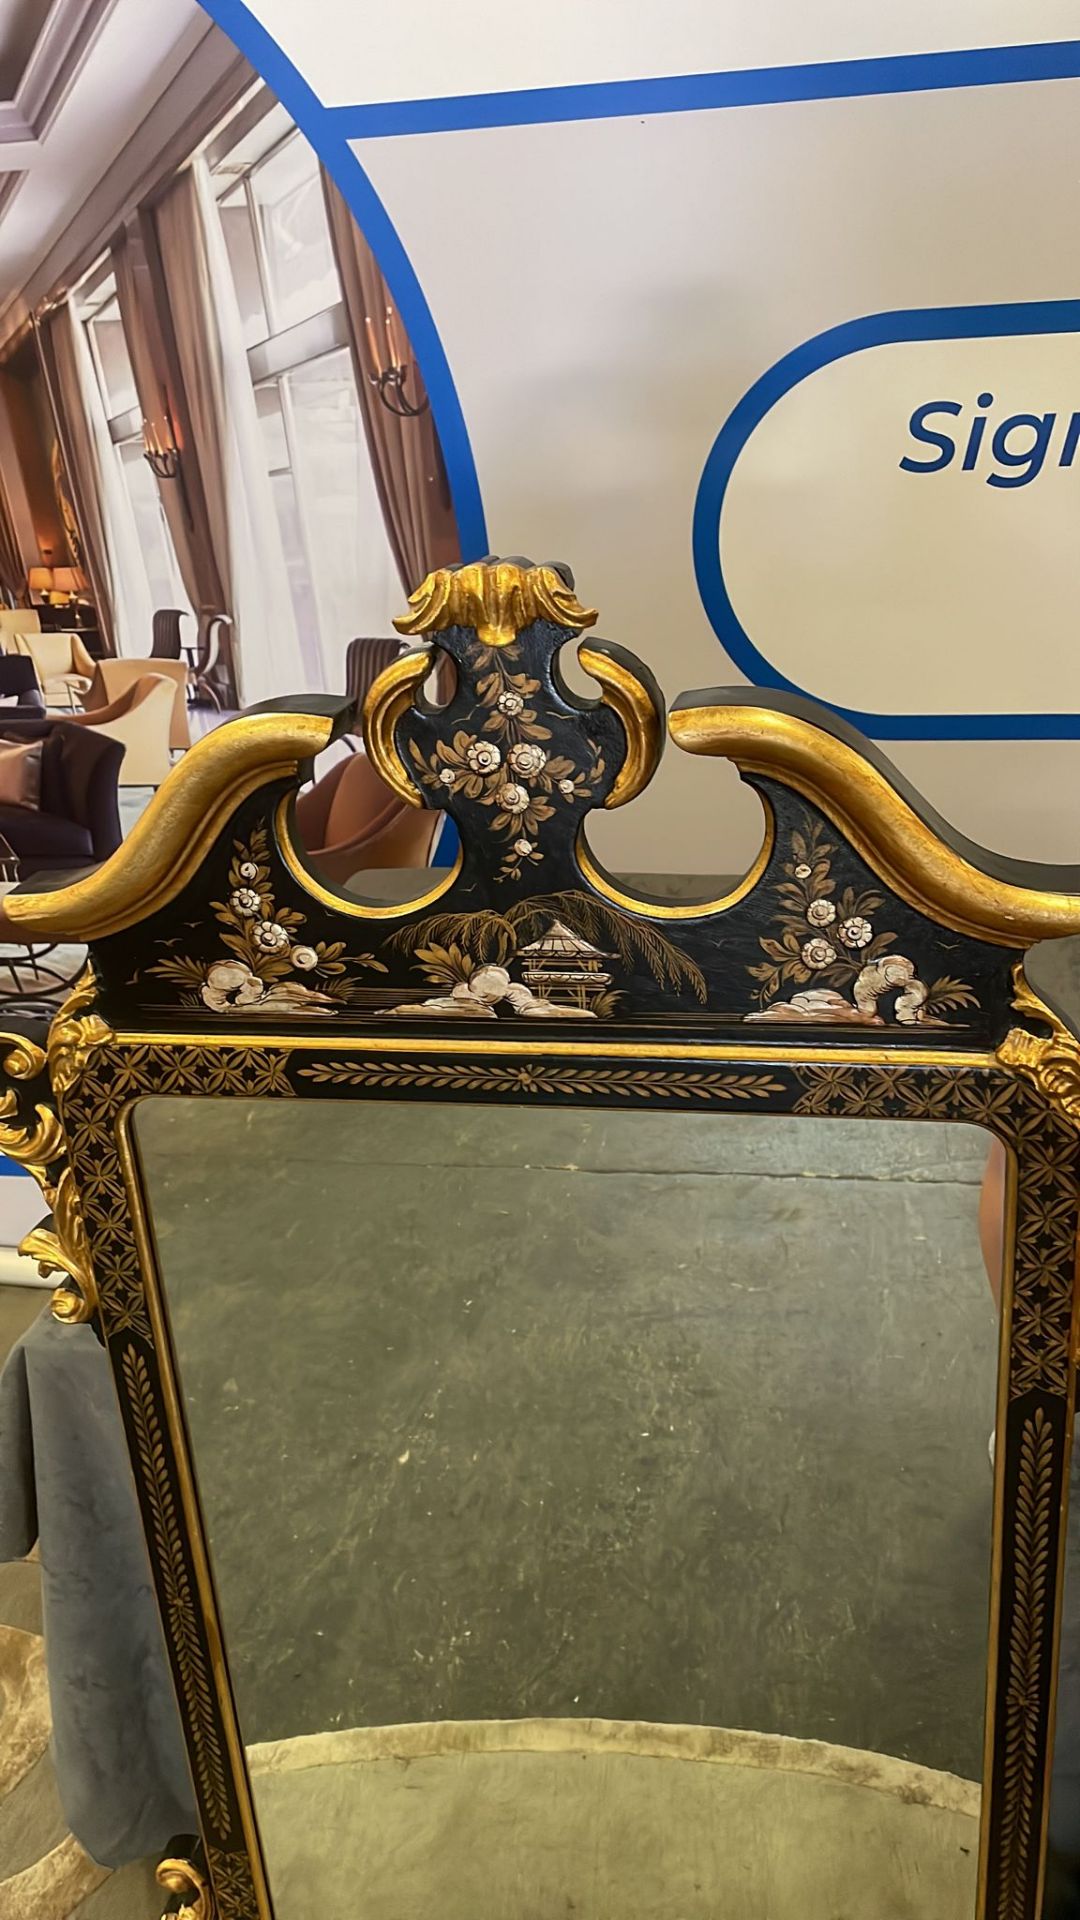 Chinoiserie black lacquer ornate carved mirror with gilt detail 72 x 125cm - Image 3 of 3